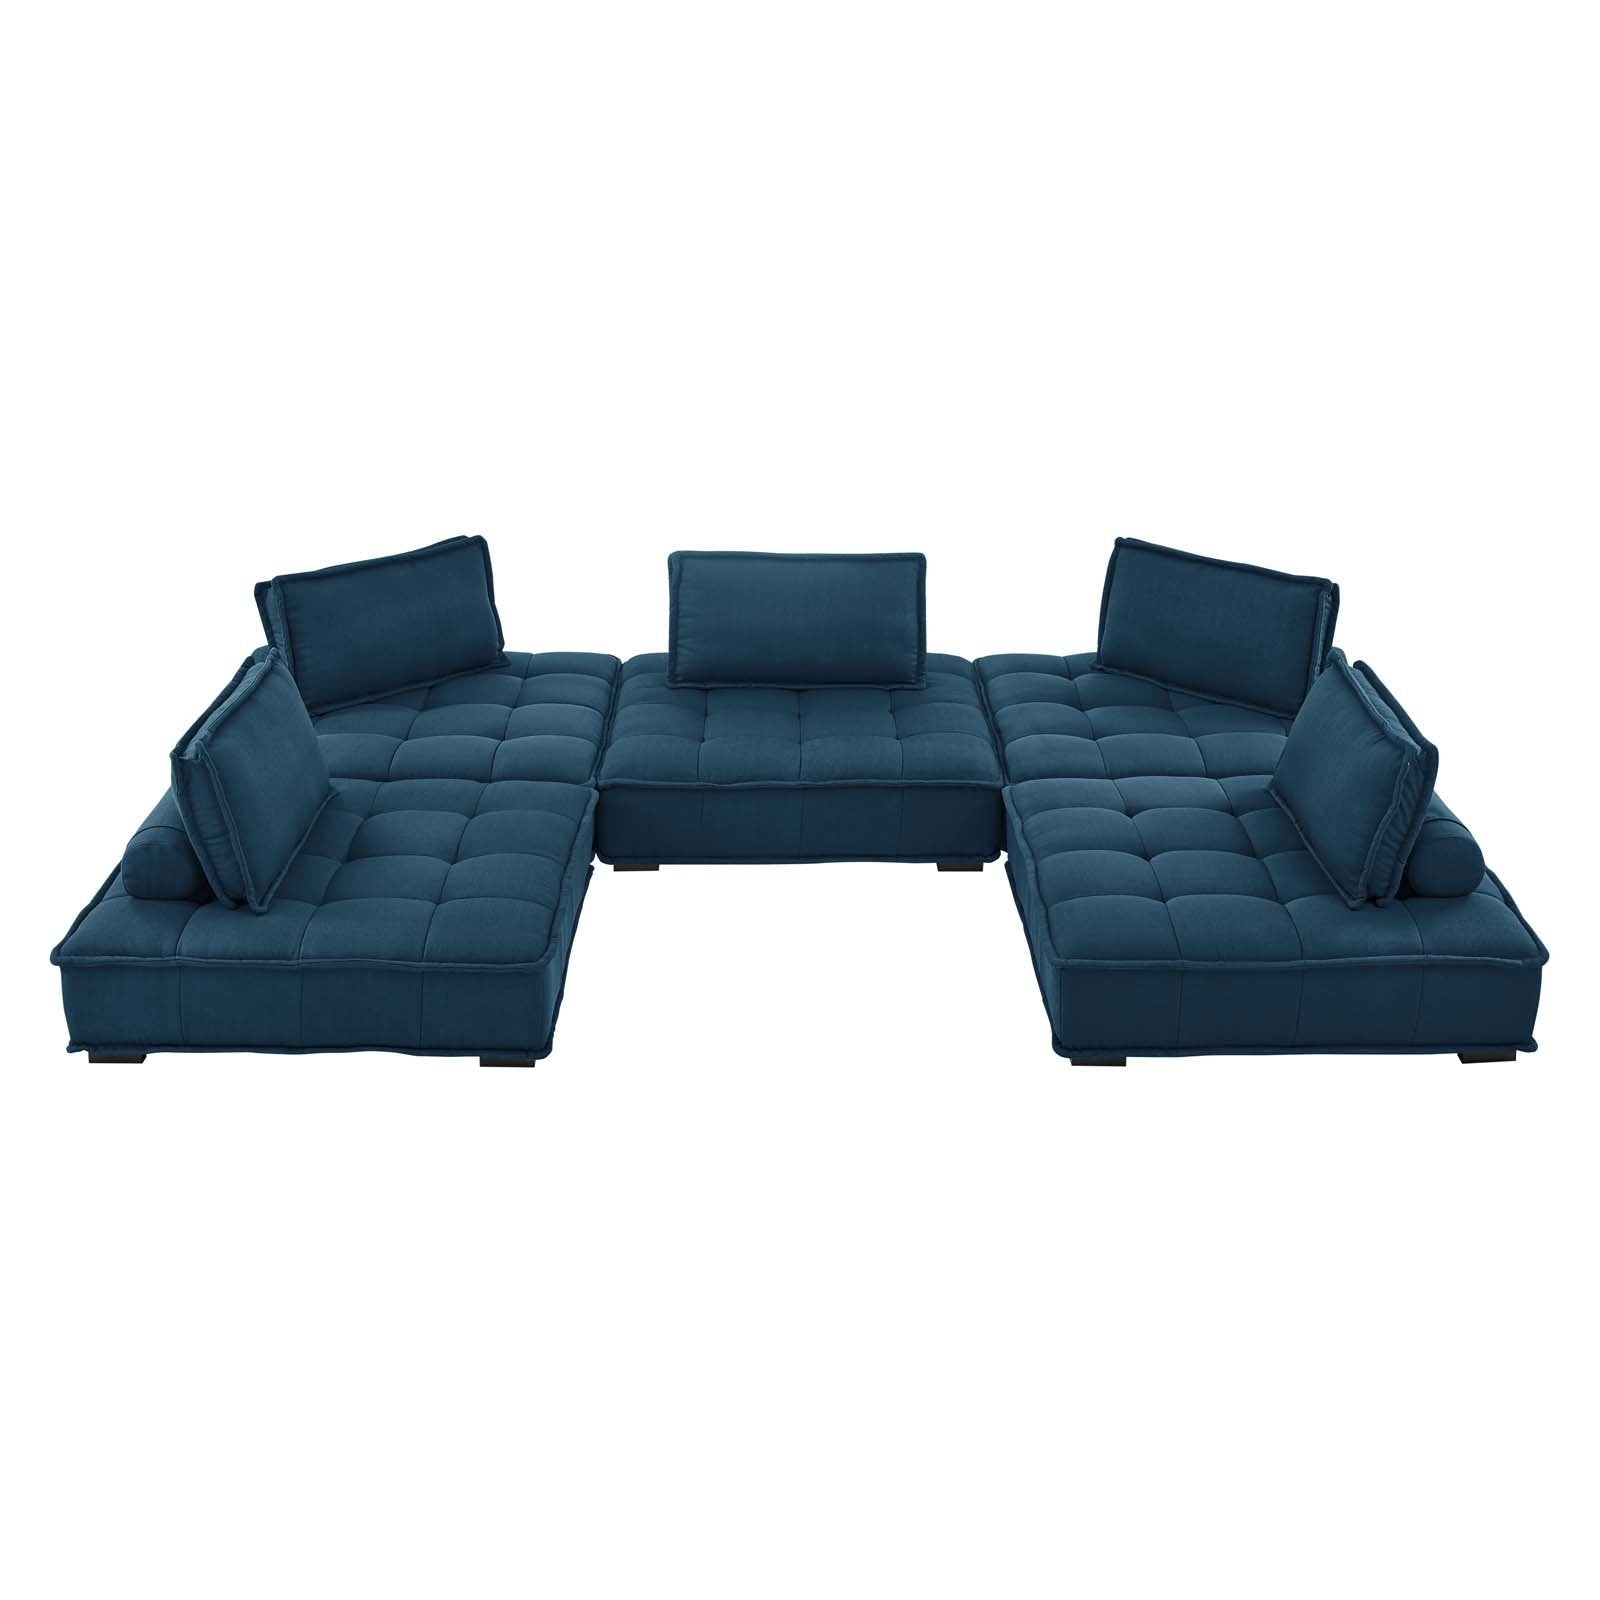 Saunter Tufted Fabric 5-Piece Sectional Sofa - East Shore Modern Home Furnishings